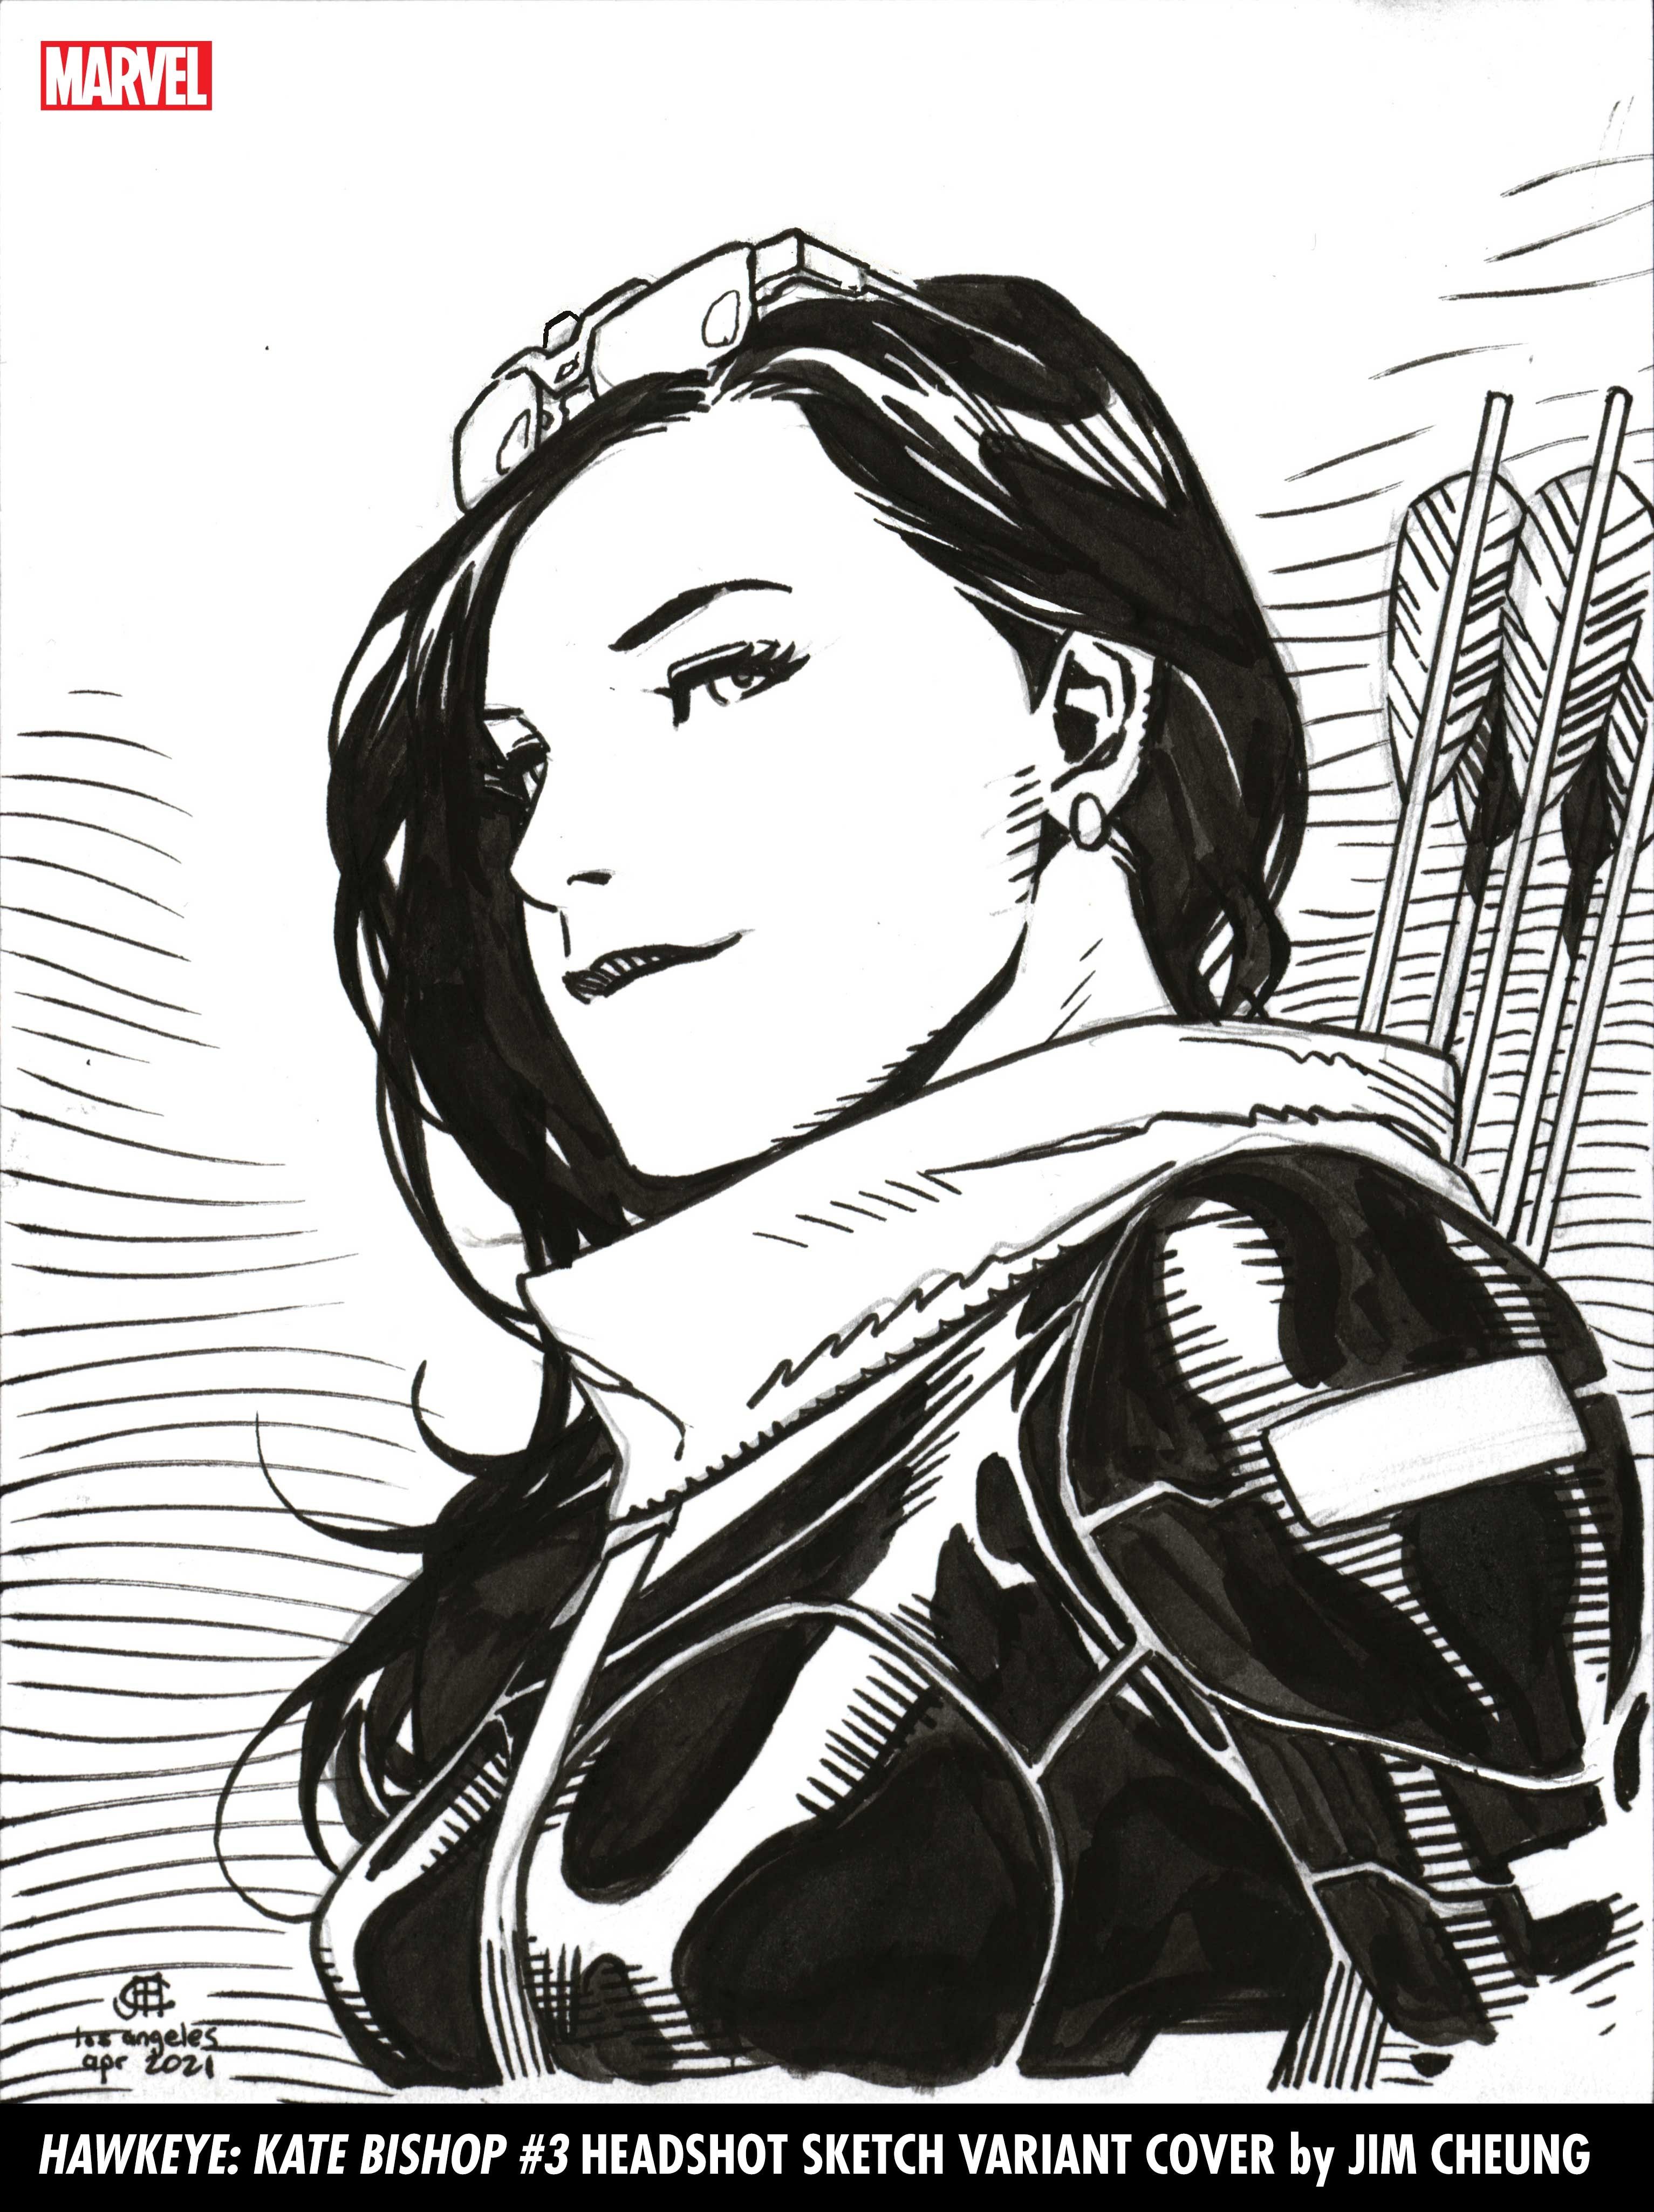 Black and white headshot cover of Kate Bishop by Jim Cheung